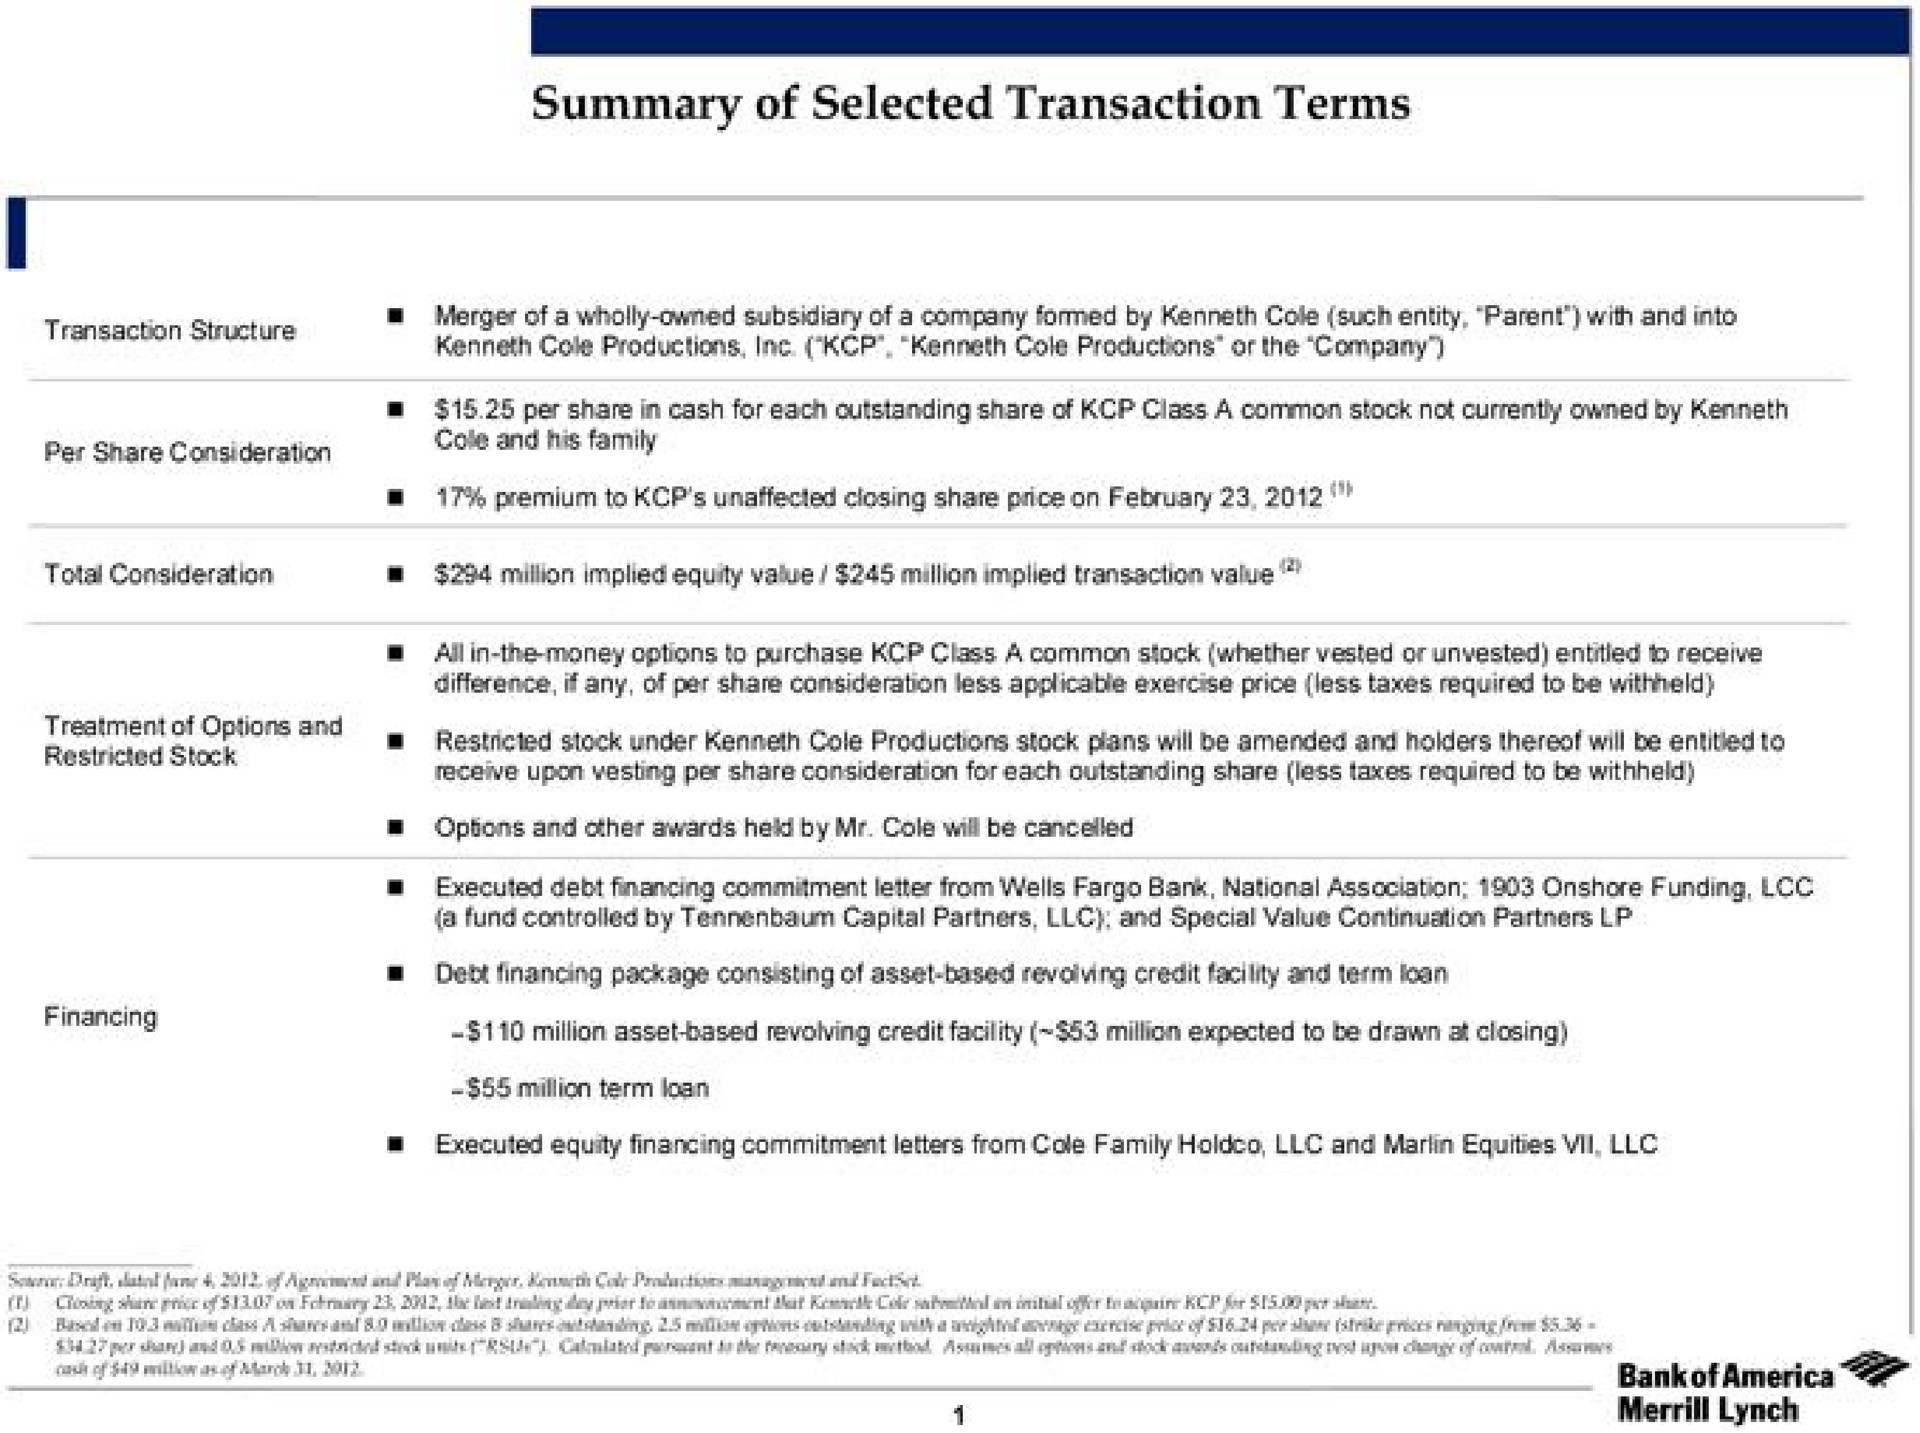 summary of selected transaction terms per share consideration | Bank of America